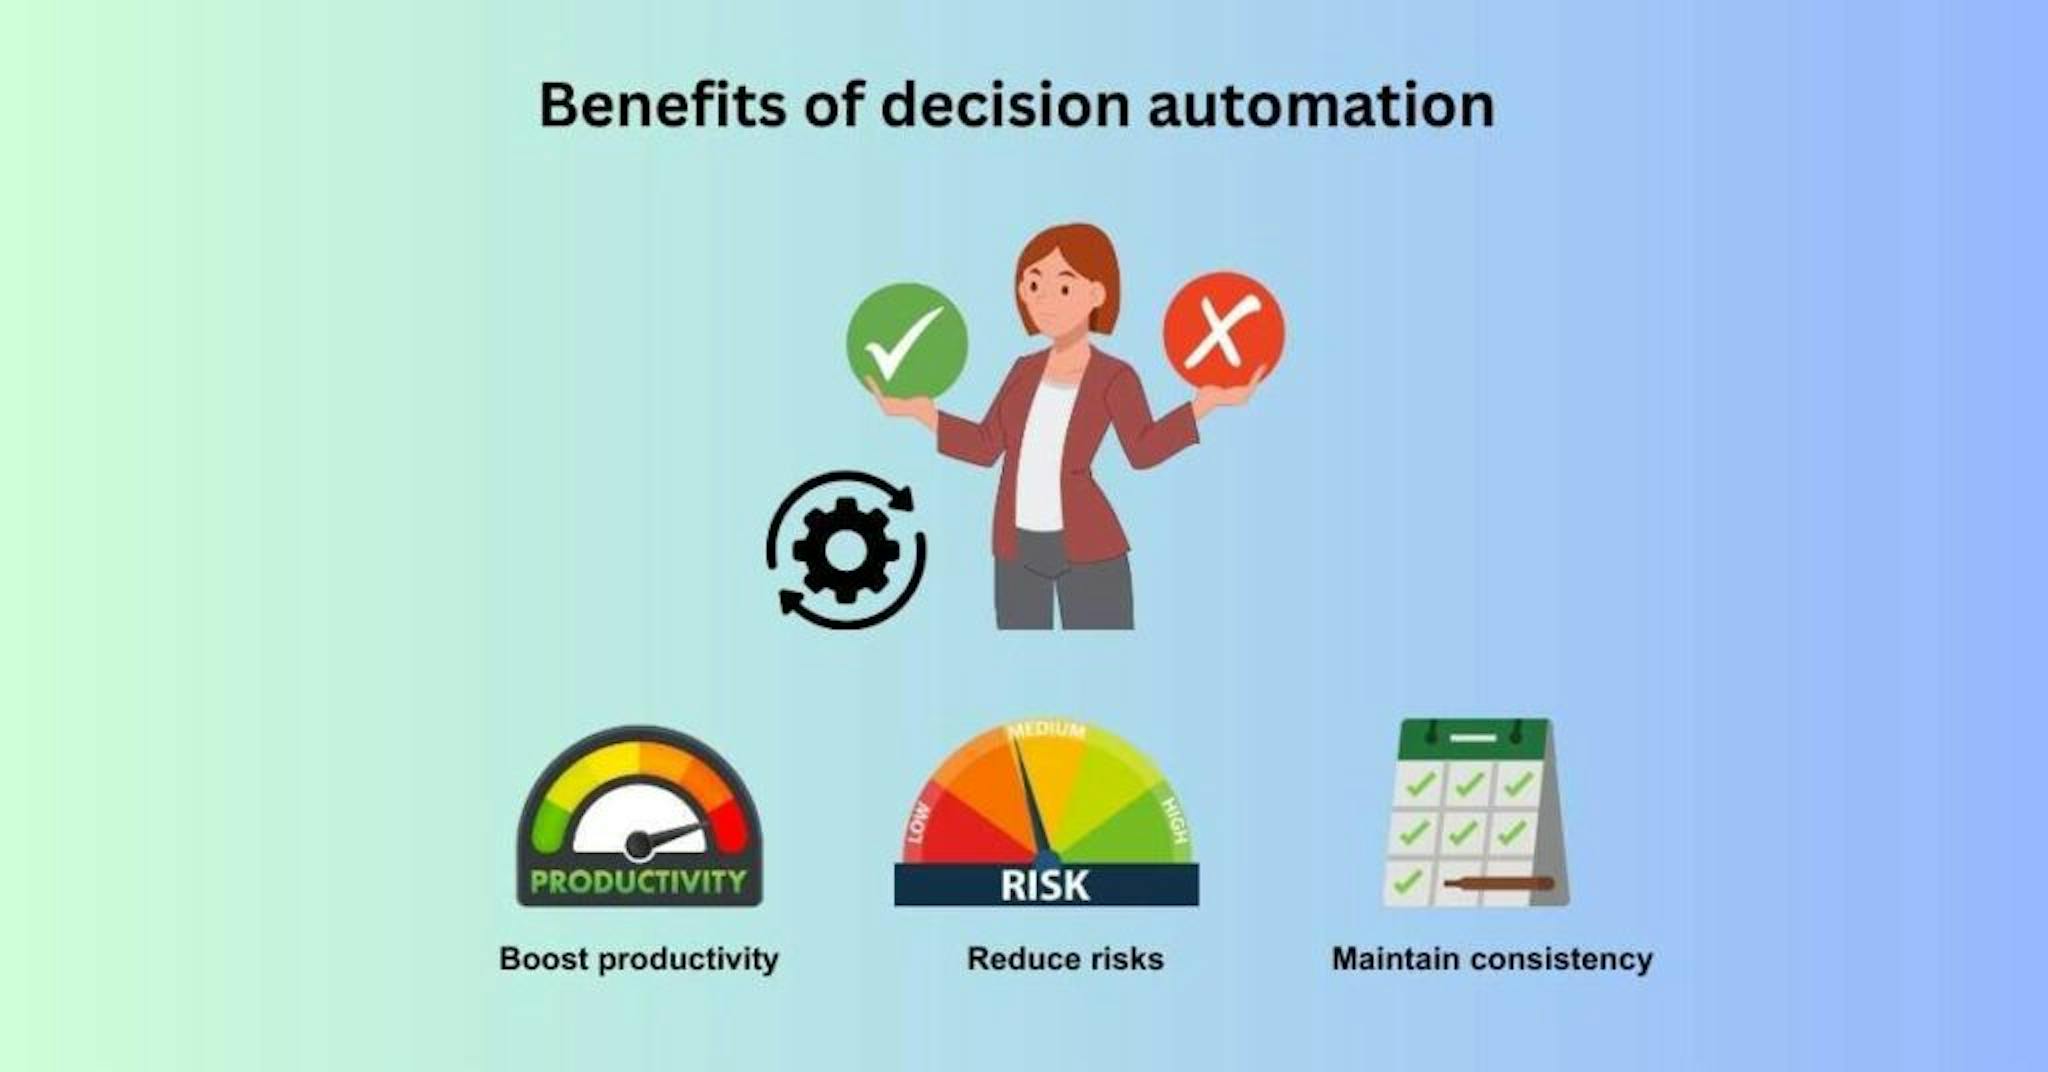 Benefits of Decision Support Systems Automation